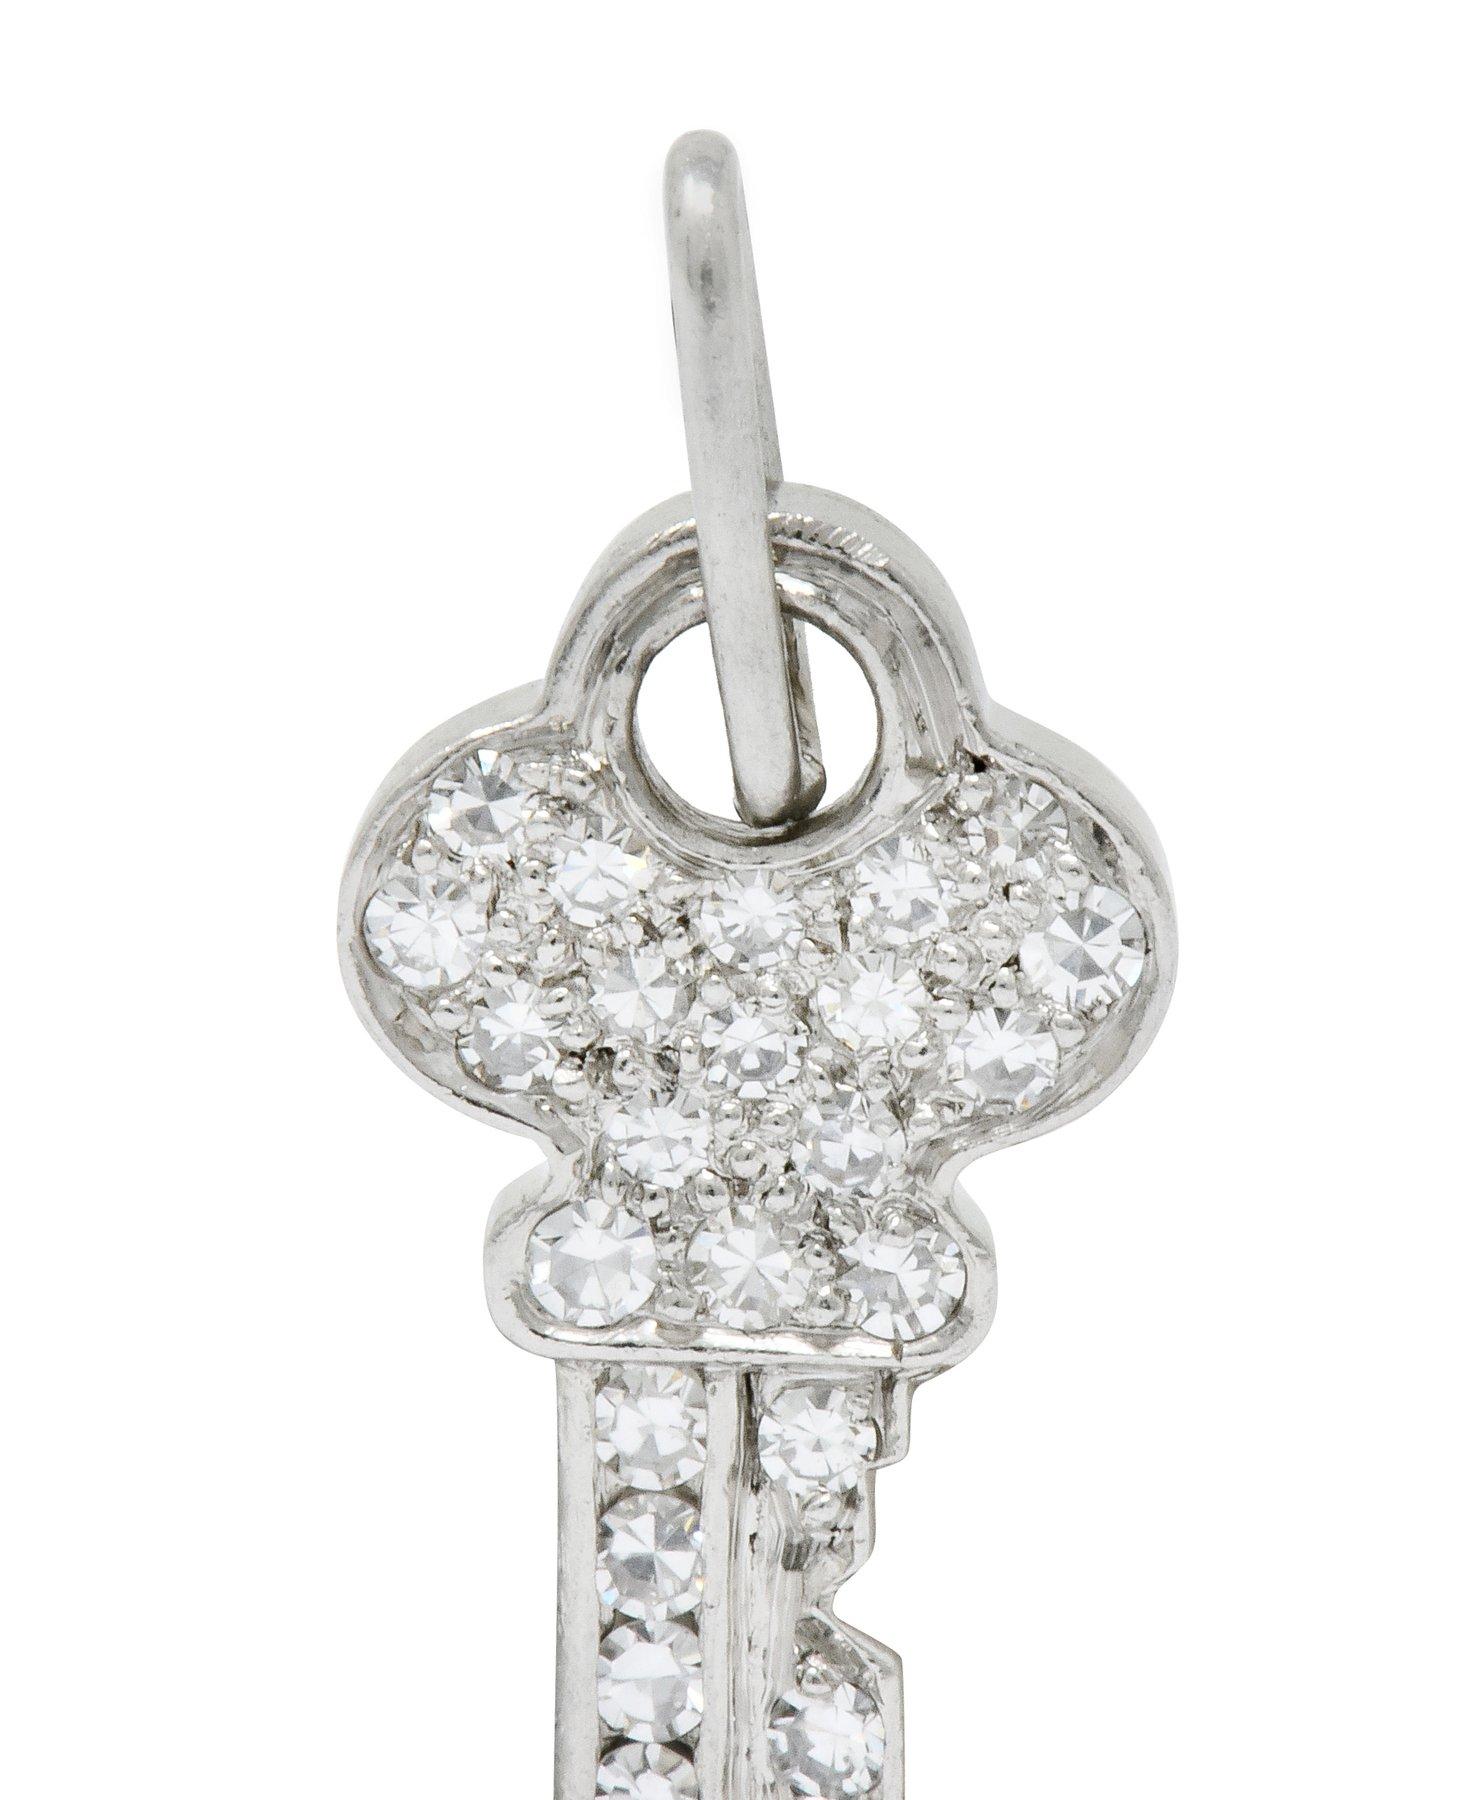 Charm is designed as a stylized key

Pavé set throughout by single cut diamonds weighing approximately 0.50 carat total, F/G color and VVS clarity

Completed by elongated jump ring bale

Fully signed Tiffany & Co.

Tested as platinum

Circa: